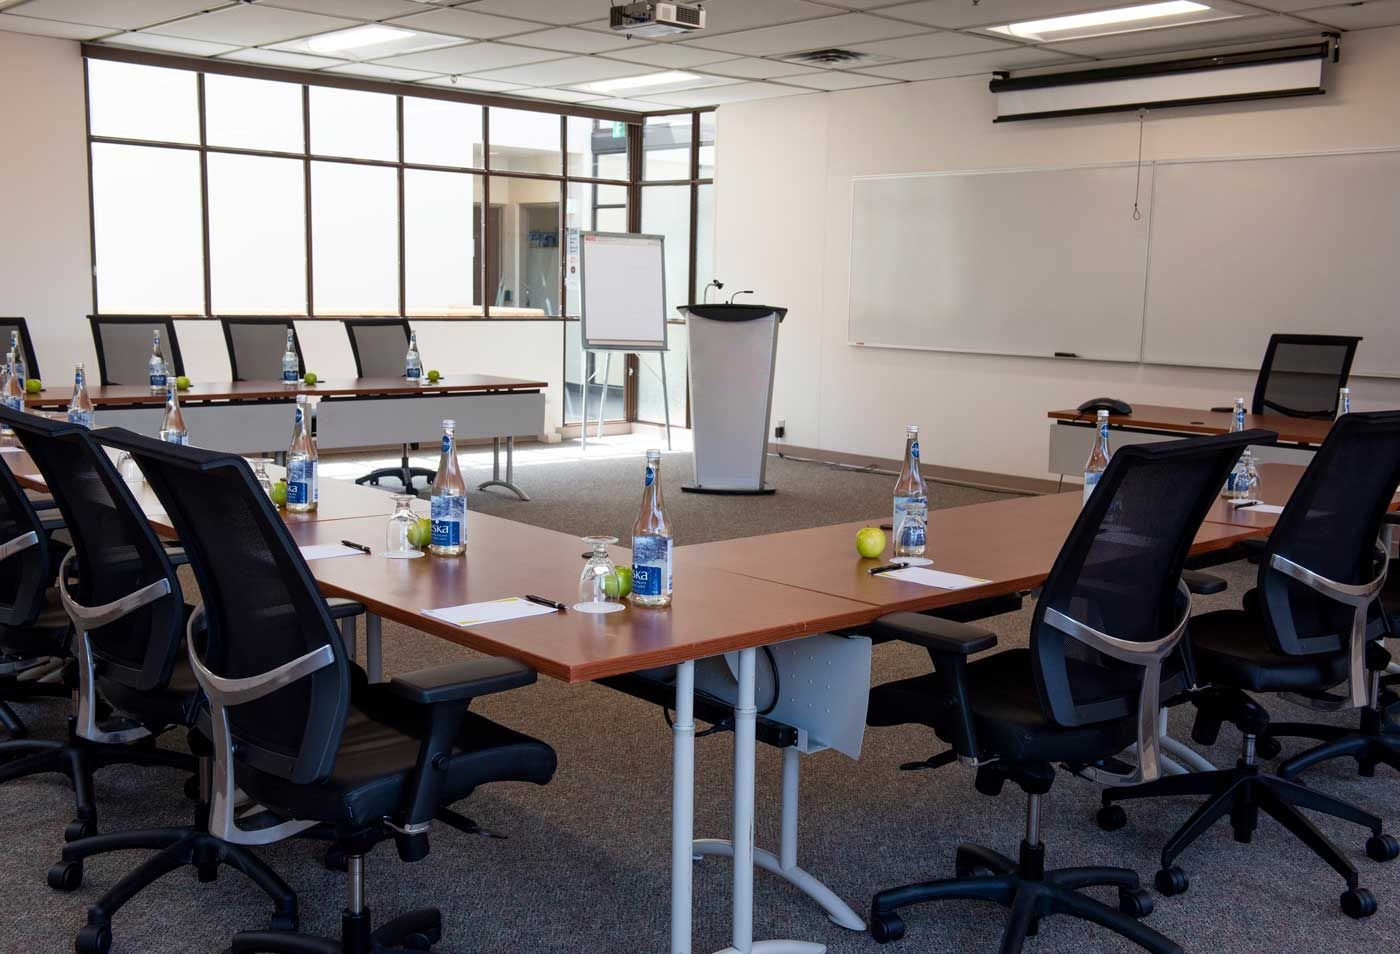 70,000 sq. ft. of state-of-the-art meeting spaces